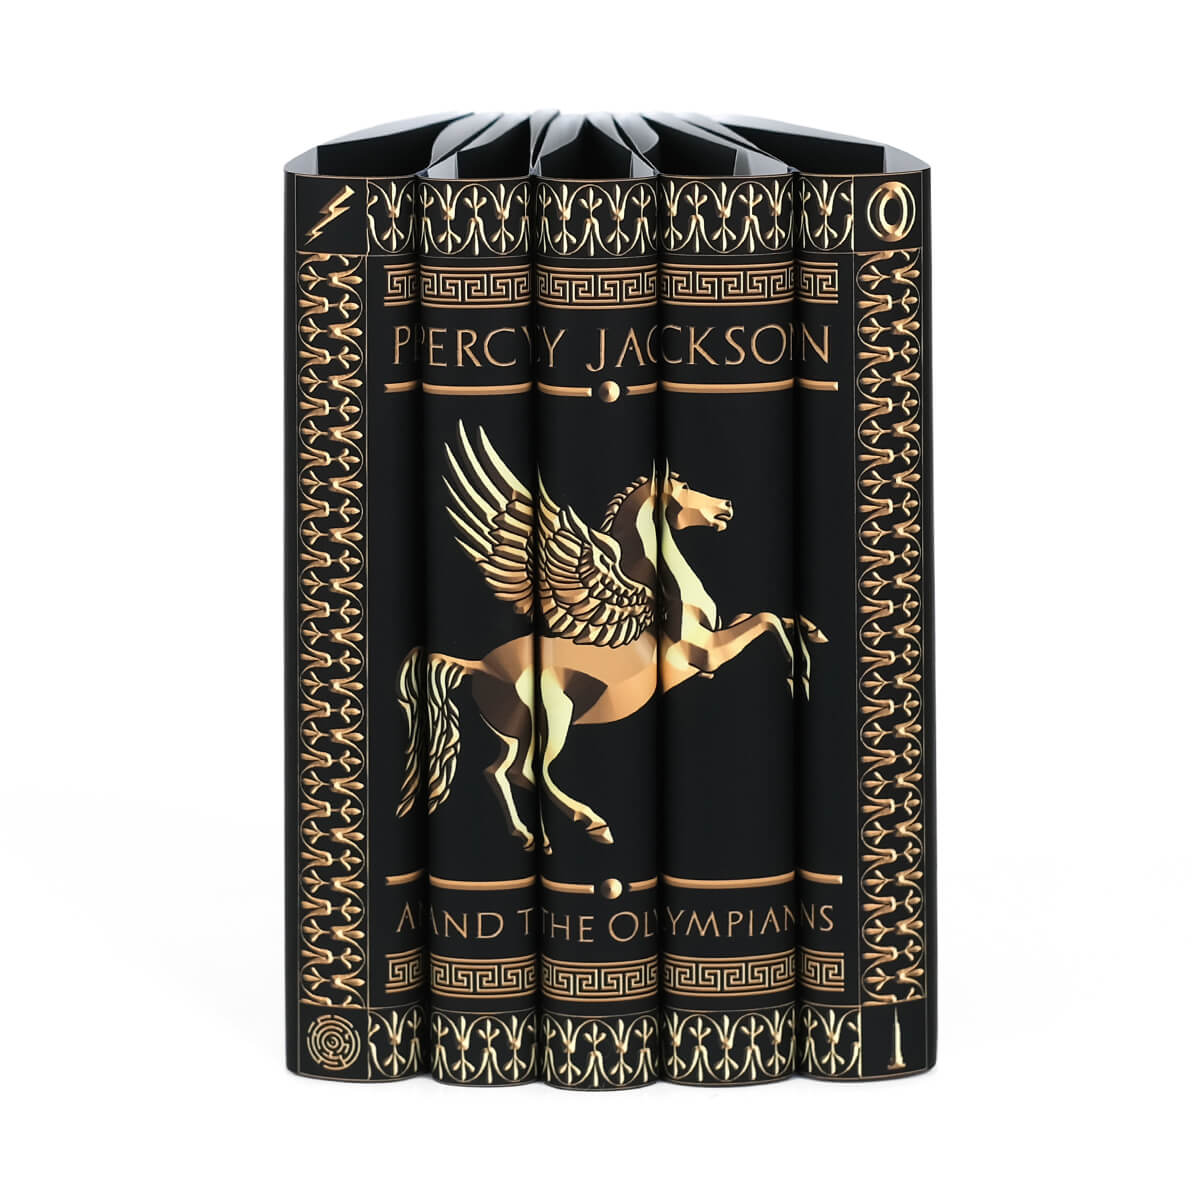 Custom collectible Percy Jackson dust jackets from Juniper Custom. The solid black covers feature an gold embossed style illustration of a pegasus surrounded by ornamental borders with the series title across the spines.